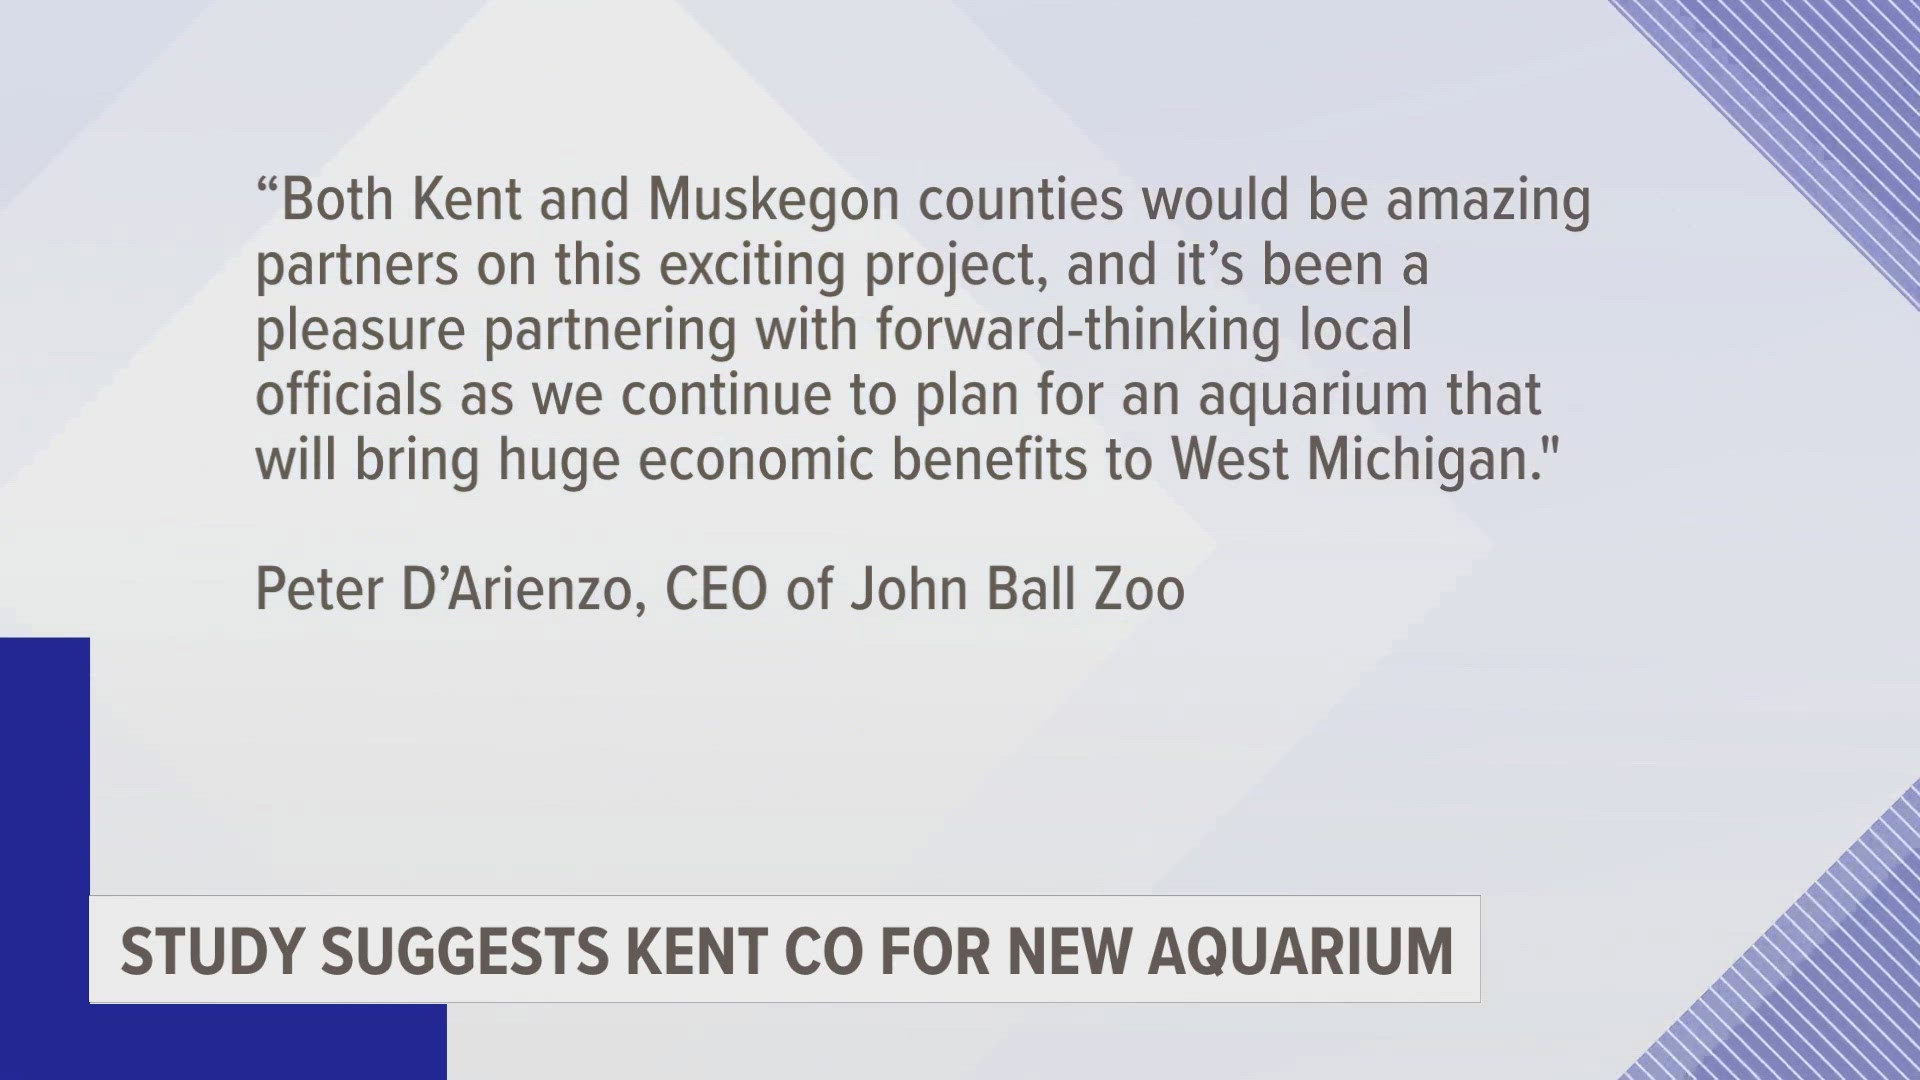 The feasibility study found the aquarium project could generate $2.9 billion over 10 years.